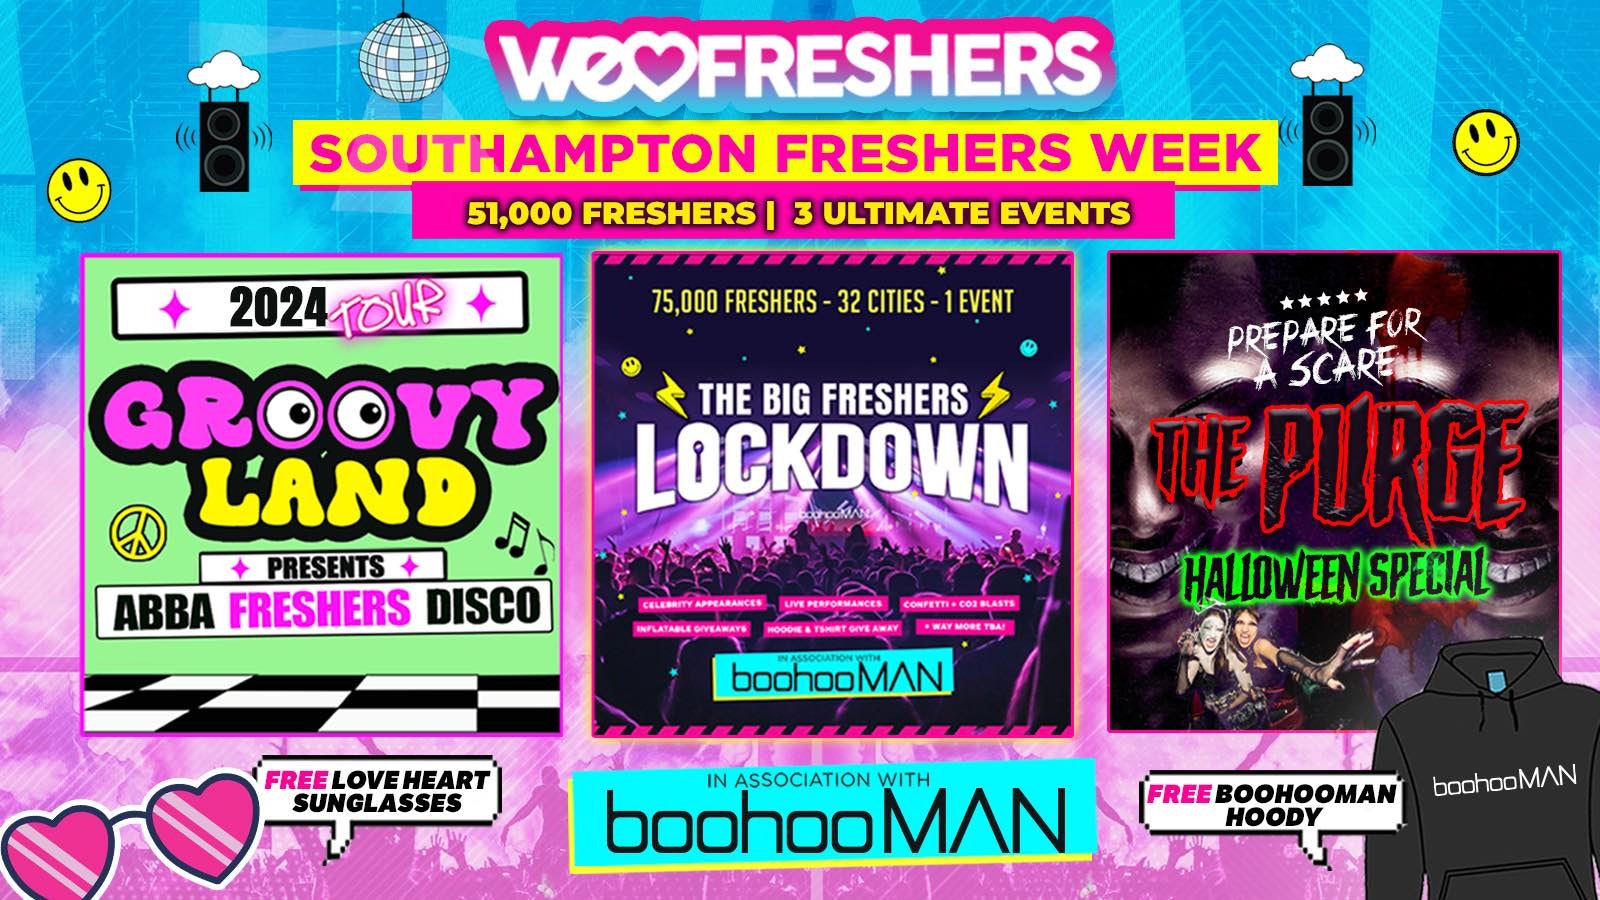 WE LOVE SOUTHAMPTON FRESHERS 2024 in association with boohooMAN – 3 EVENTS❗